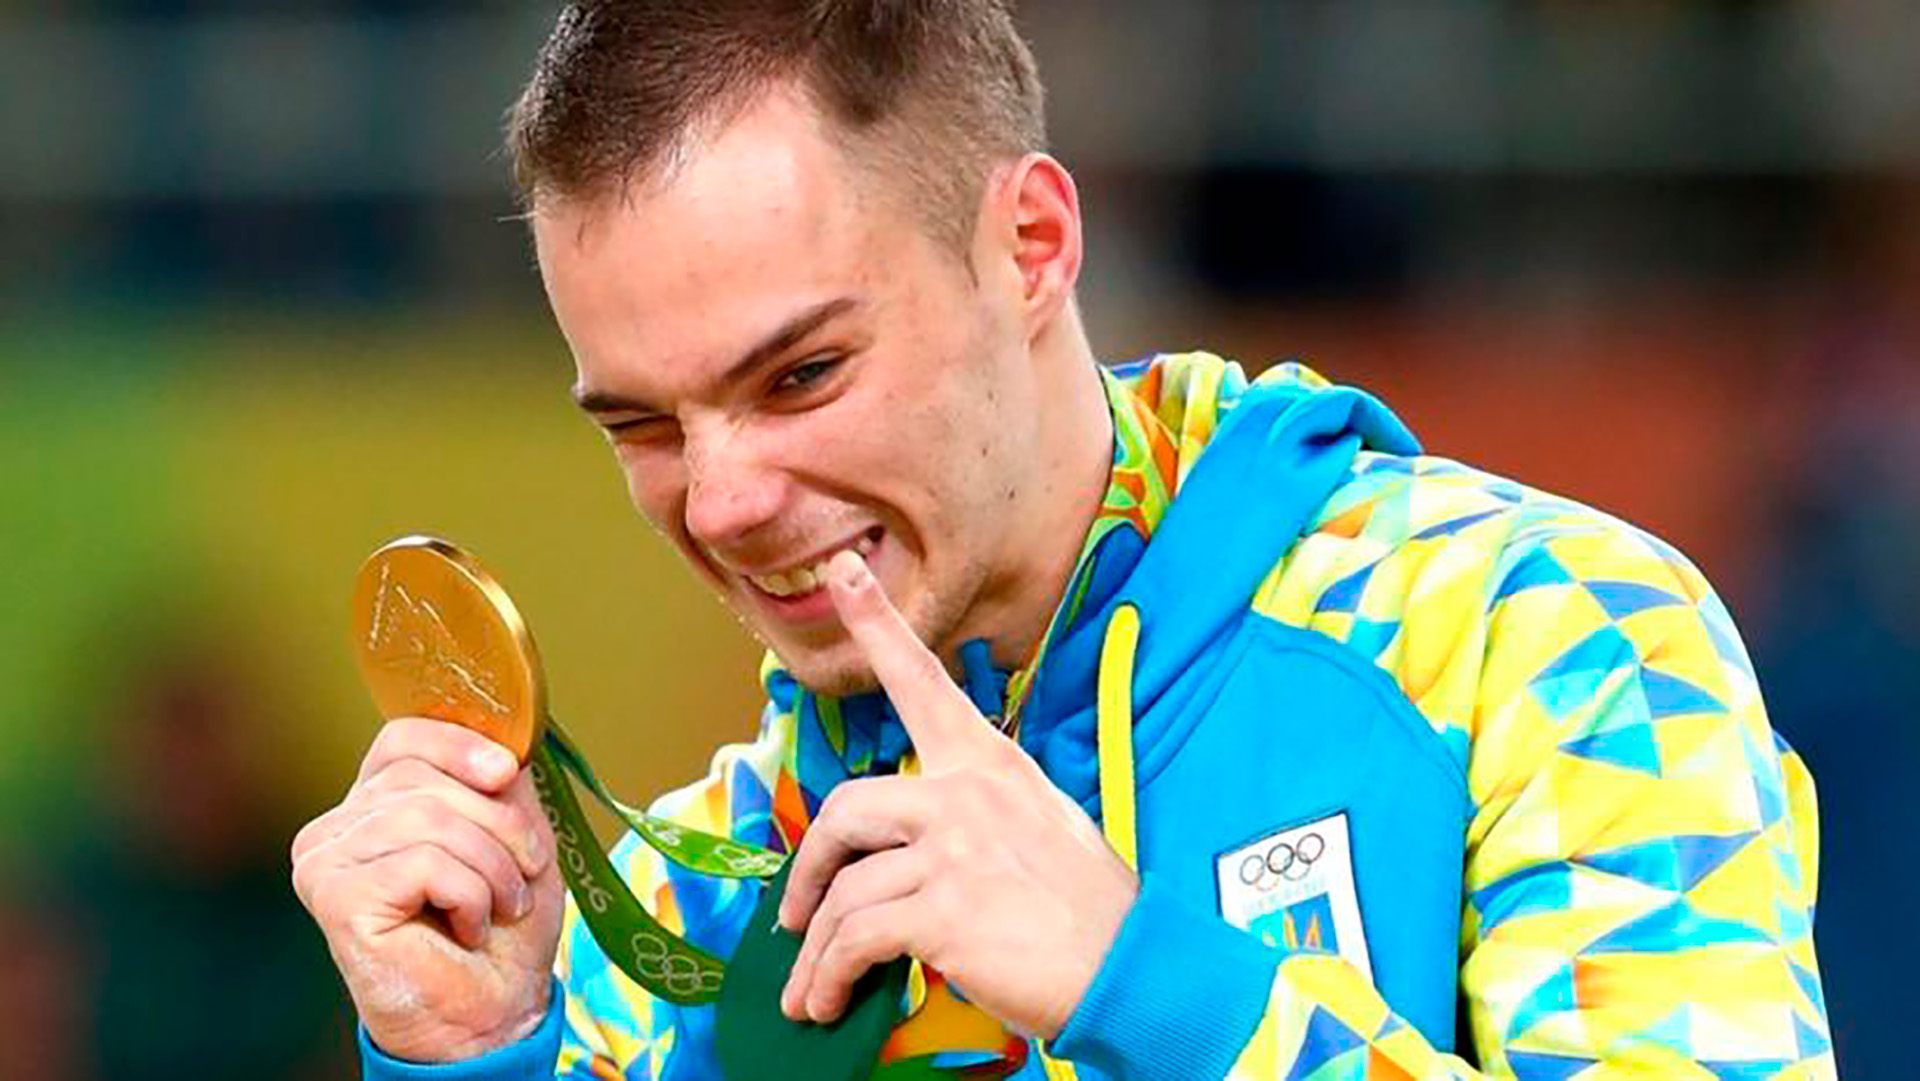 The TAS reduced the doping sanction to a famous Ukrainian gymnast and he can now compete again